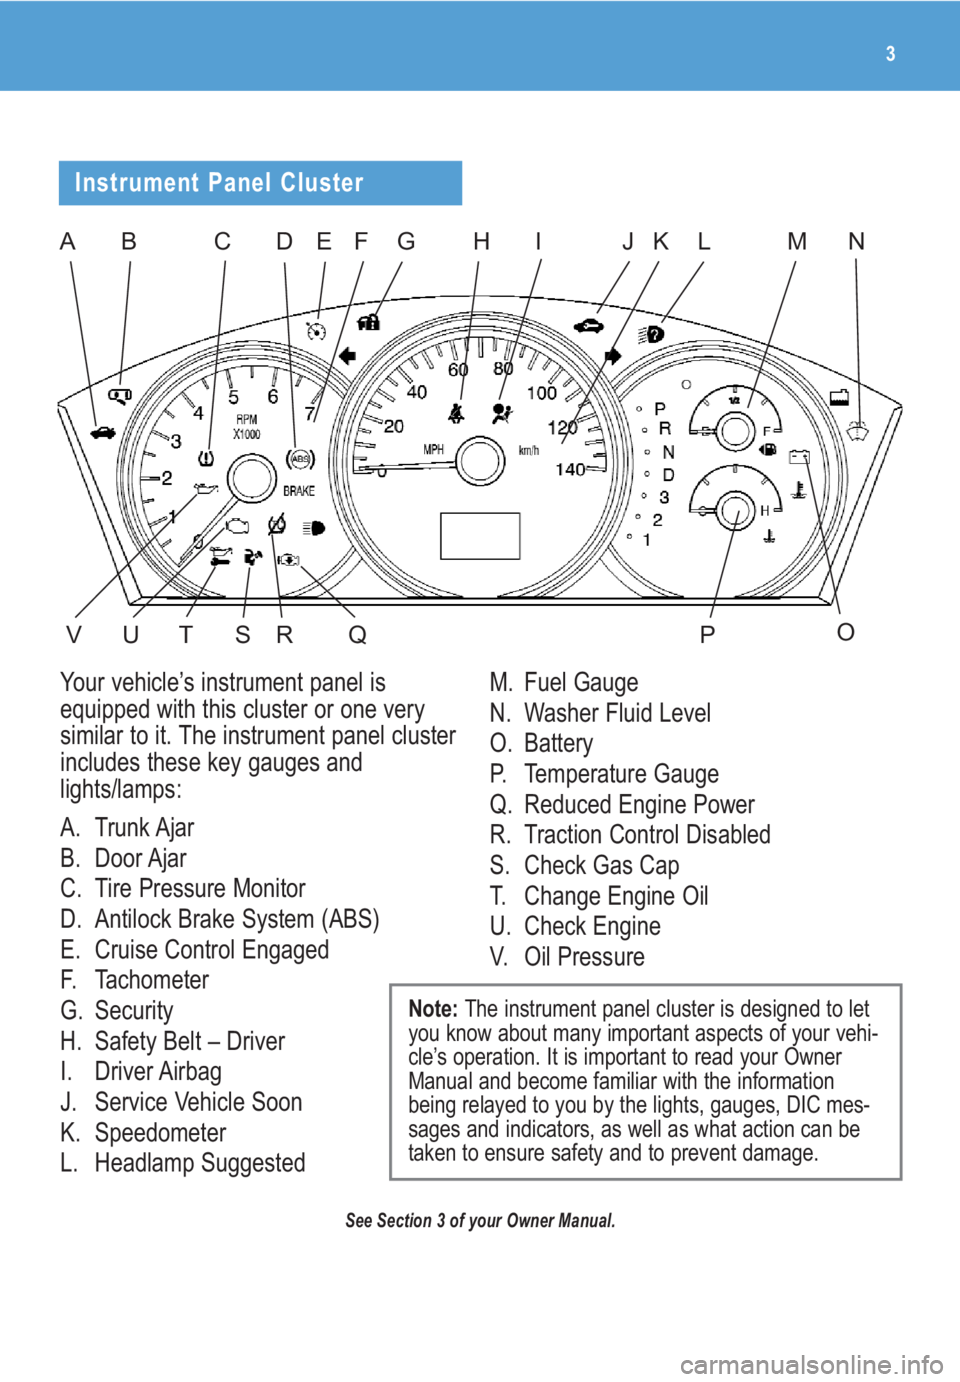 BUICK LACROSSE 2009  Get To Know Guide 3
BDFGHIKLM
UT
E
O
NA
RSVQ
J
Your vehicle’s instrument panel is
equipped with this cluster or one very
similar to it. The instrument panel cluster
includes these key gauges and
lights/lamps:
A. Trun